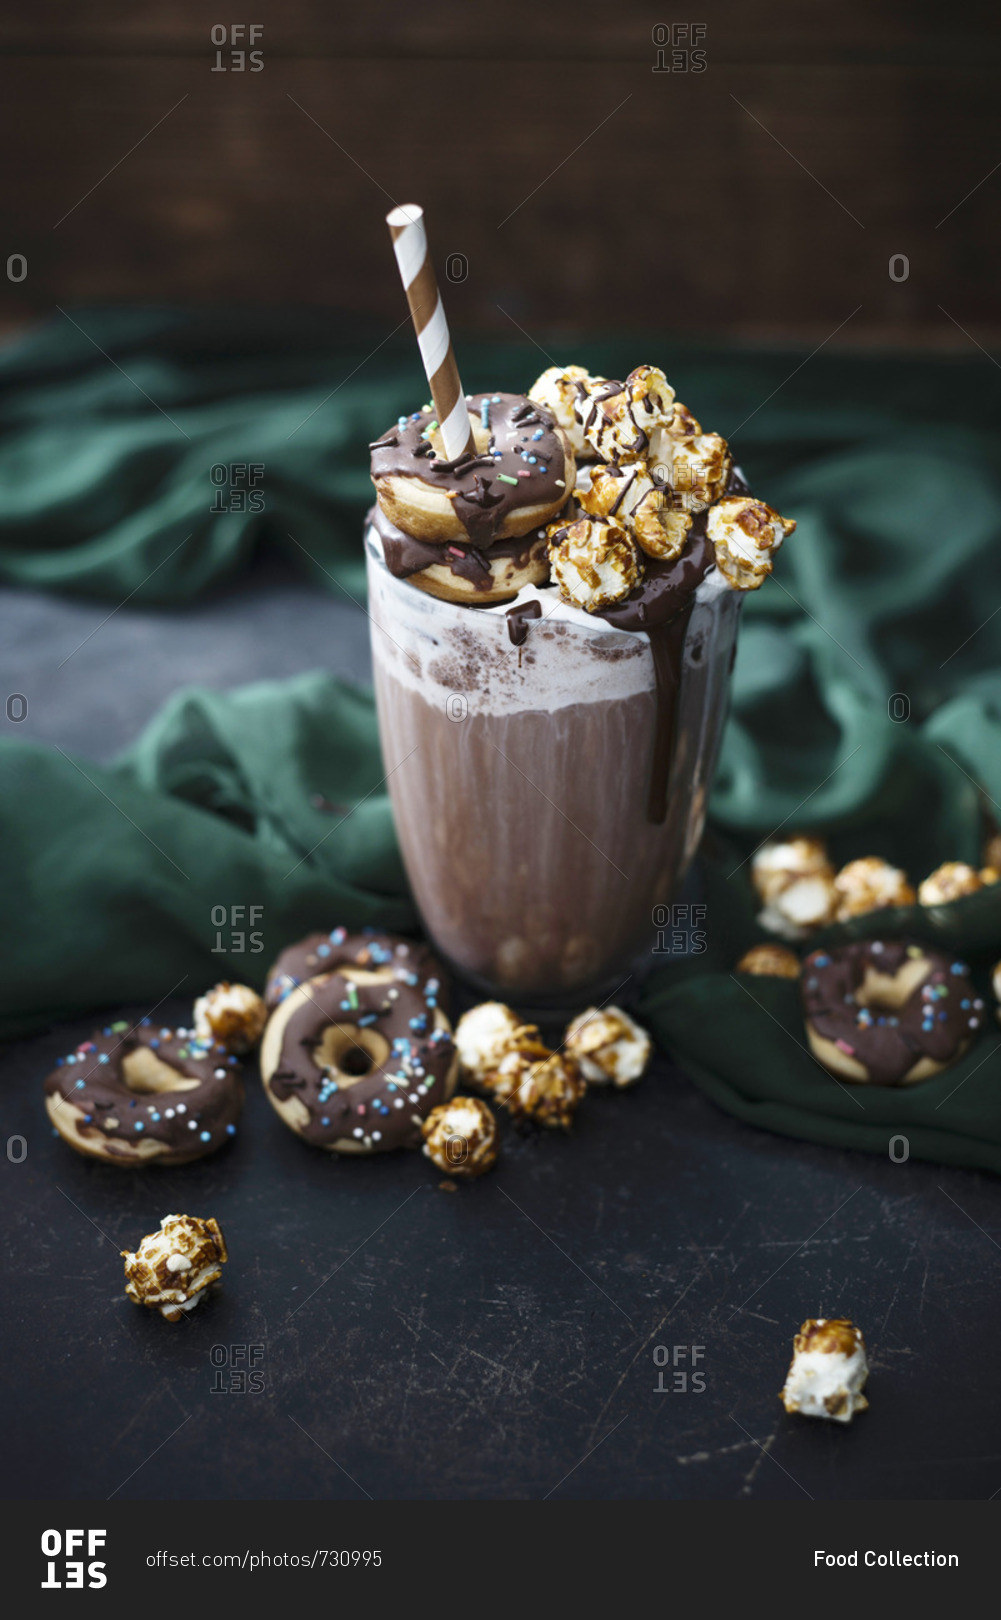 A chocolate and oat drink, soy cream, chocolate sauce, donuts and caramel popcorn (vegan)